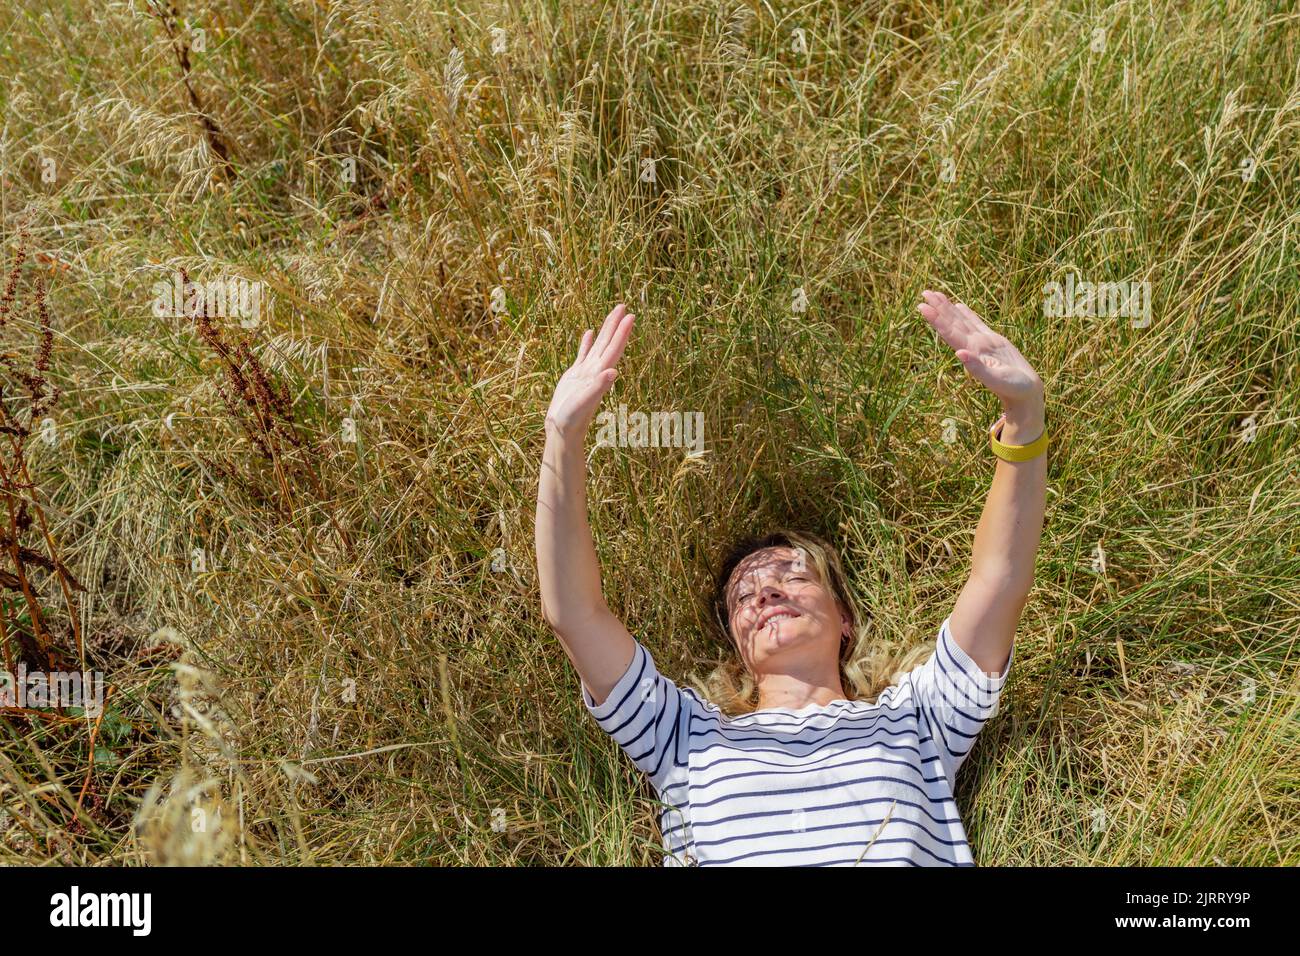 A woman lies on the grass and happily reaches out with her hands to the sun. Stock Photo